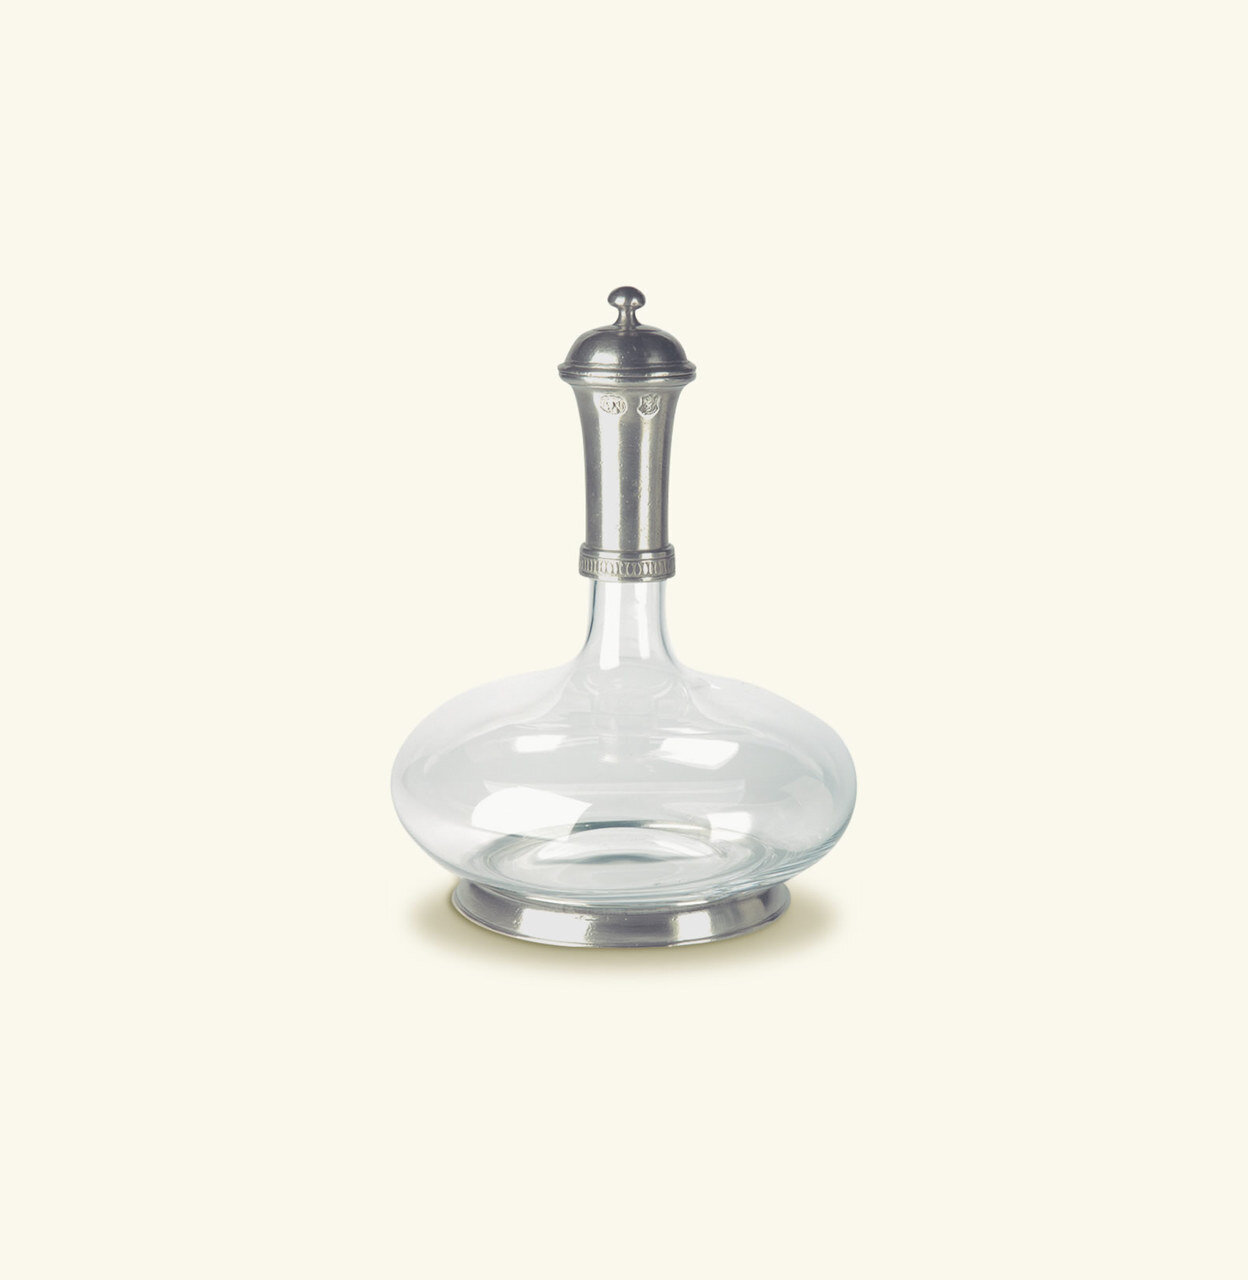 Match Pewter Wine Decanter With Top a626.0